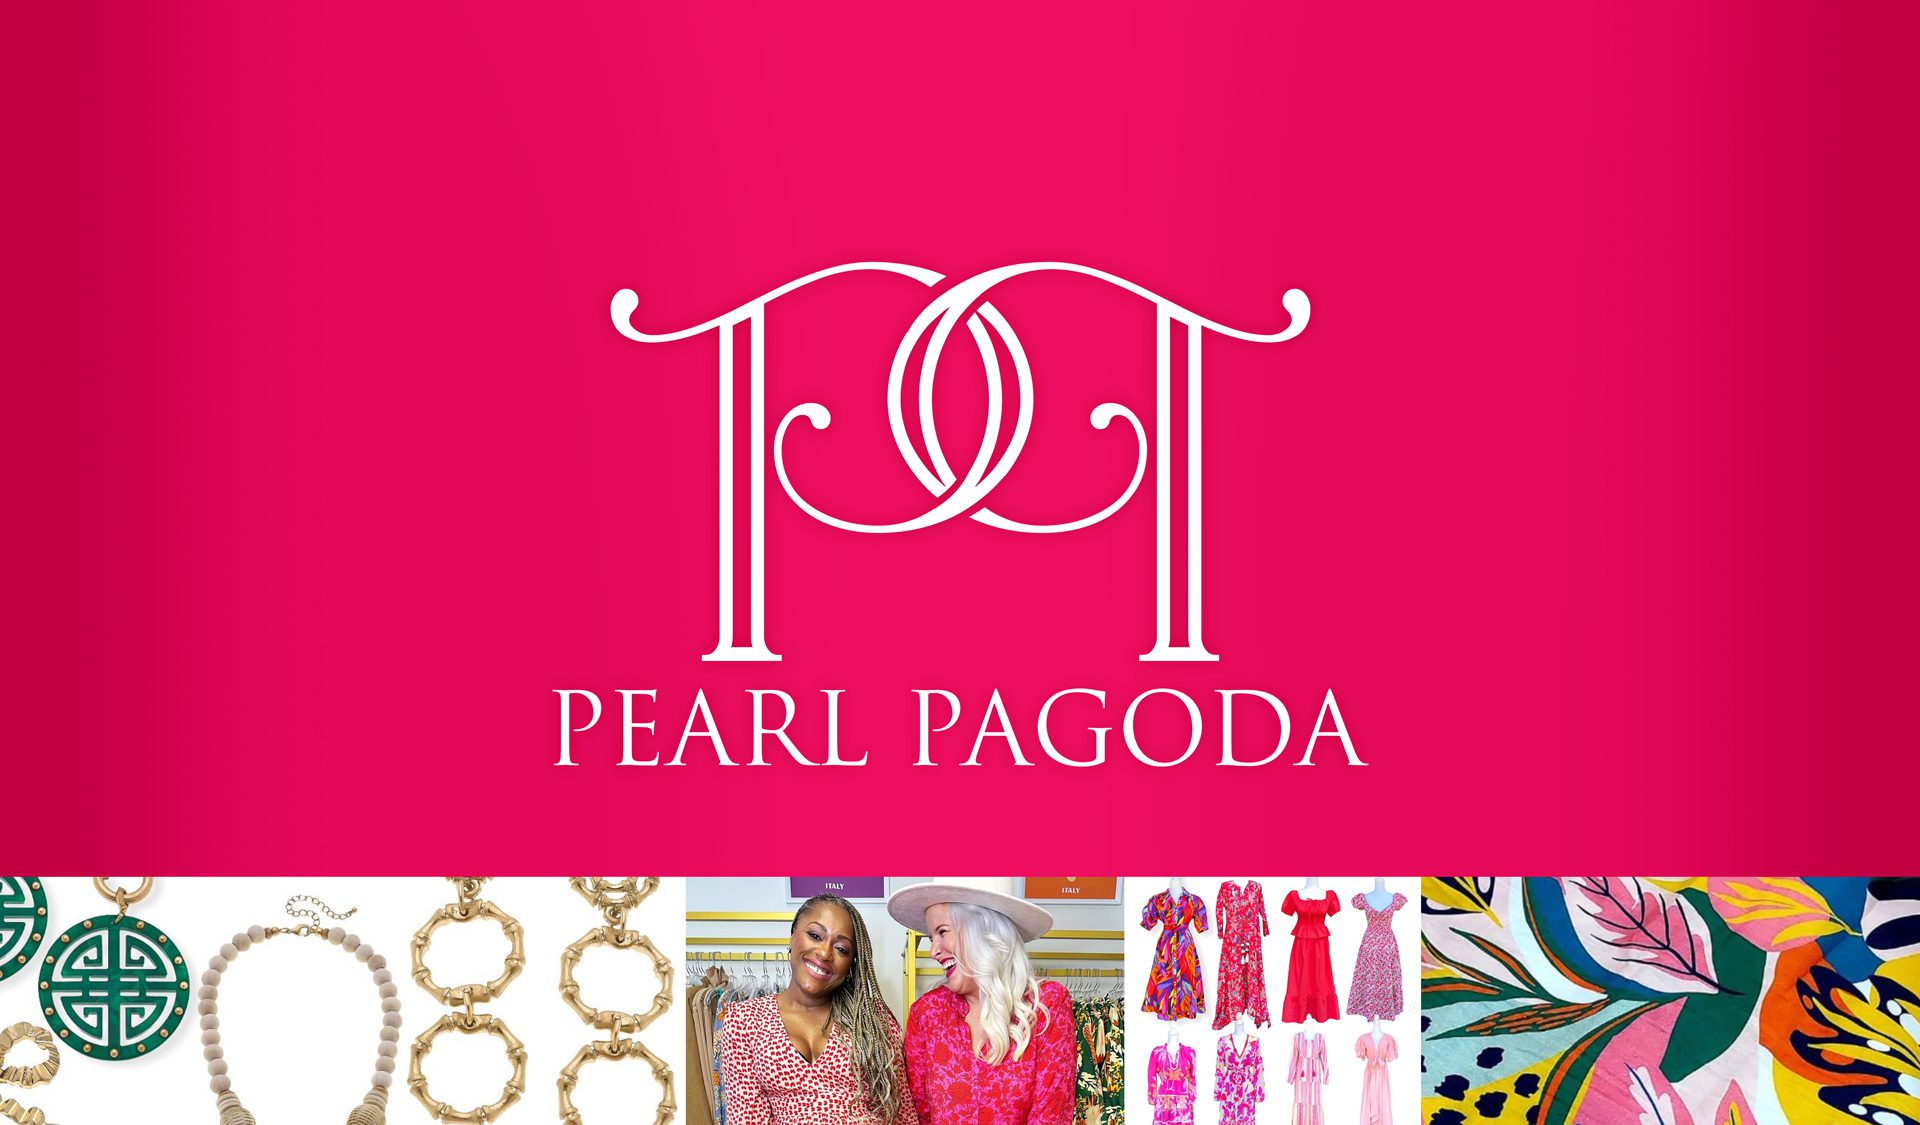 Pearl Pagoda logo and collage of images with jewelry, dresses and two women smiling